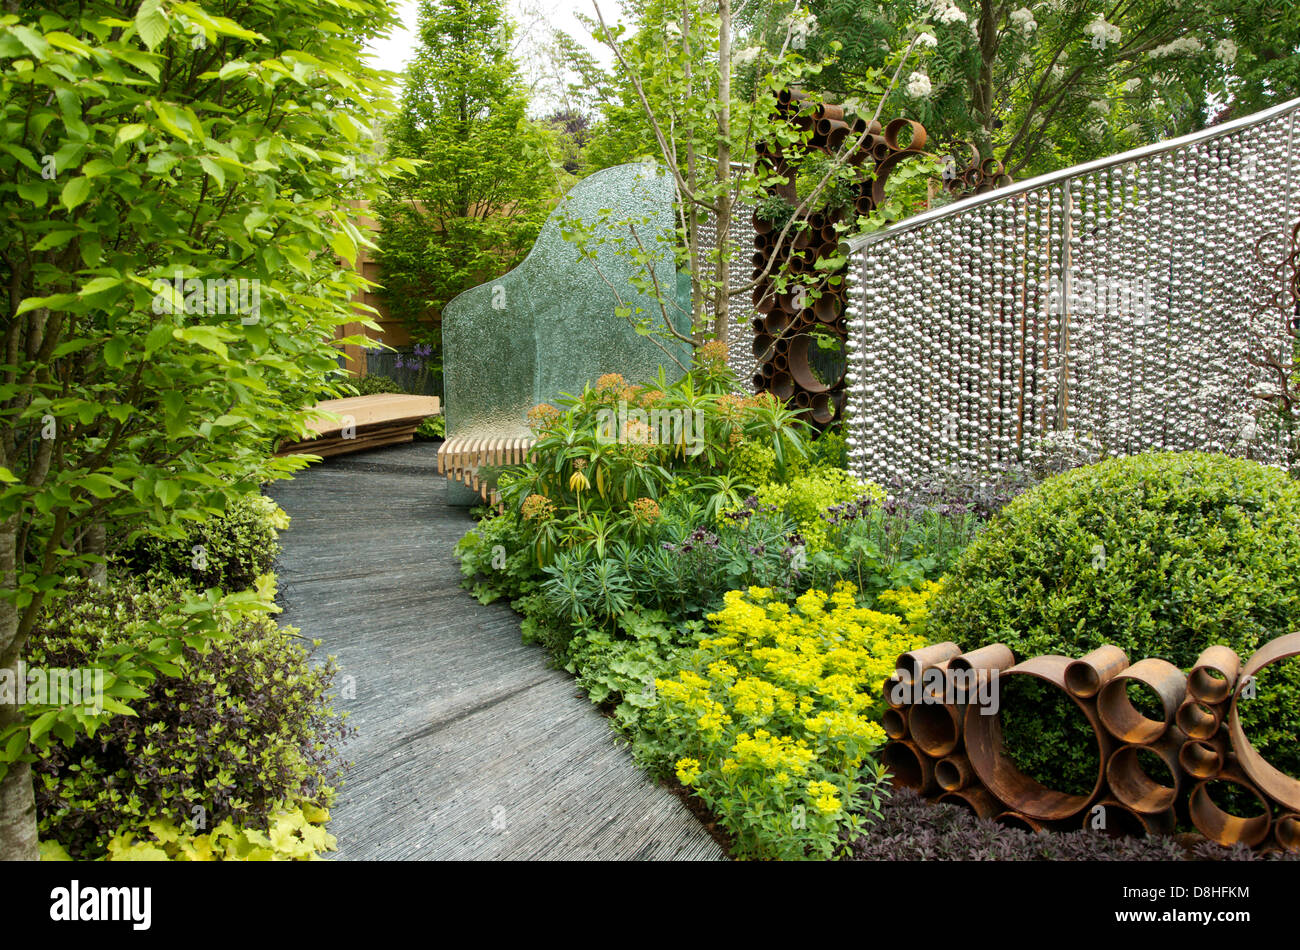 Contrasting planting and screens in The SeeAbility Garden at RHS Chelsea Flower Show 2013. The garden is designed for those with sight impairment. Stock Photo